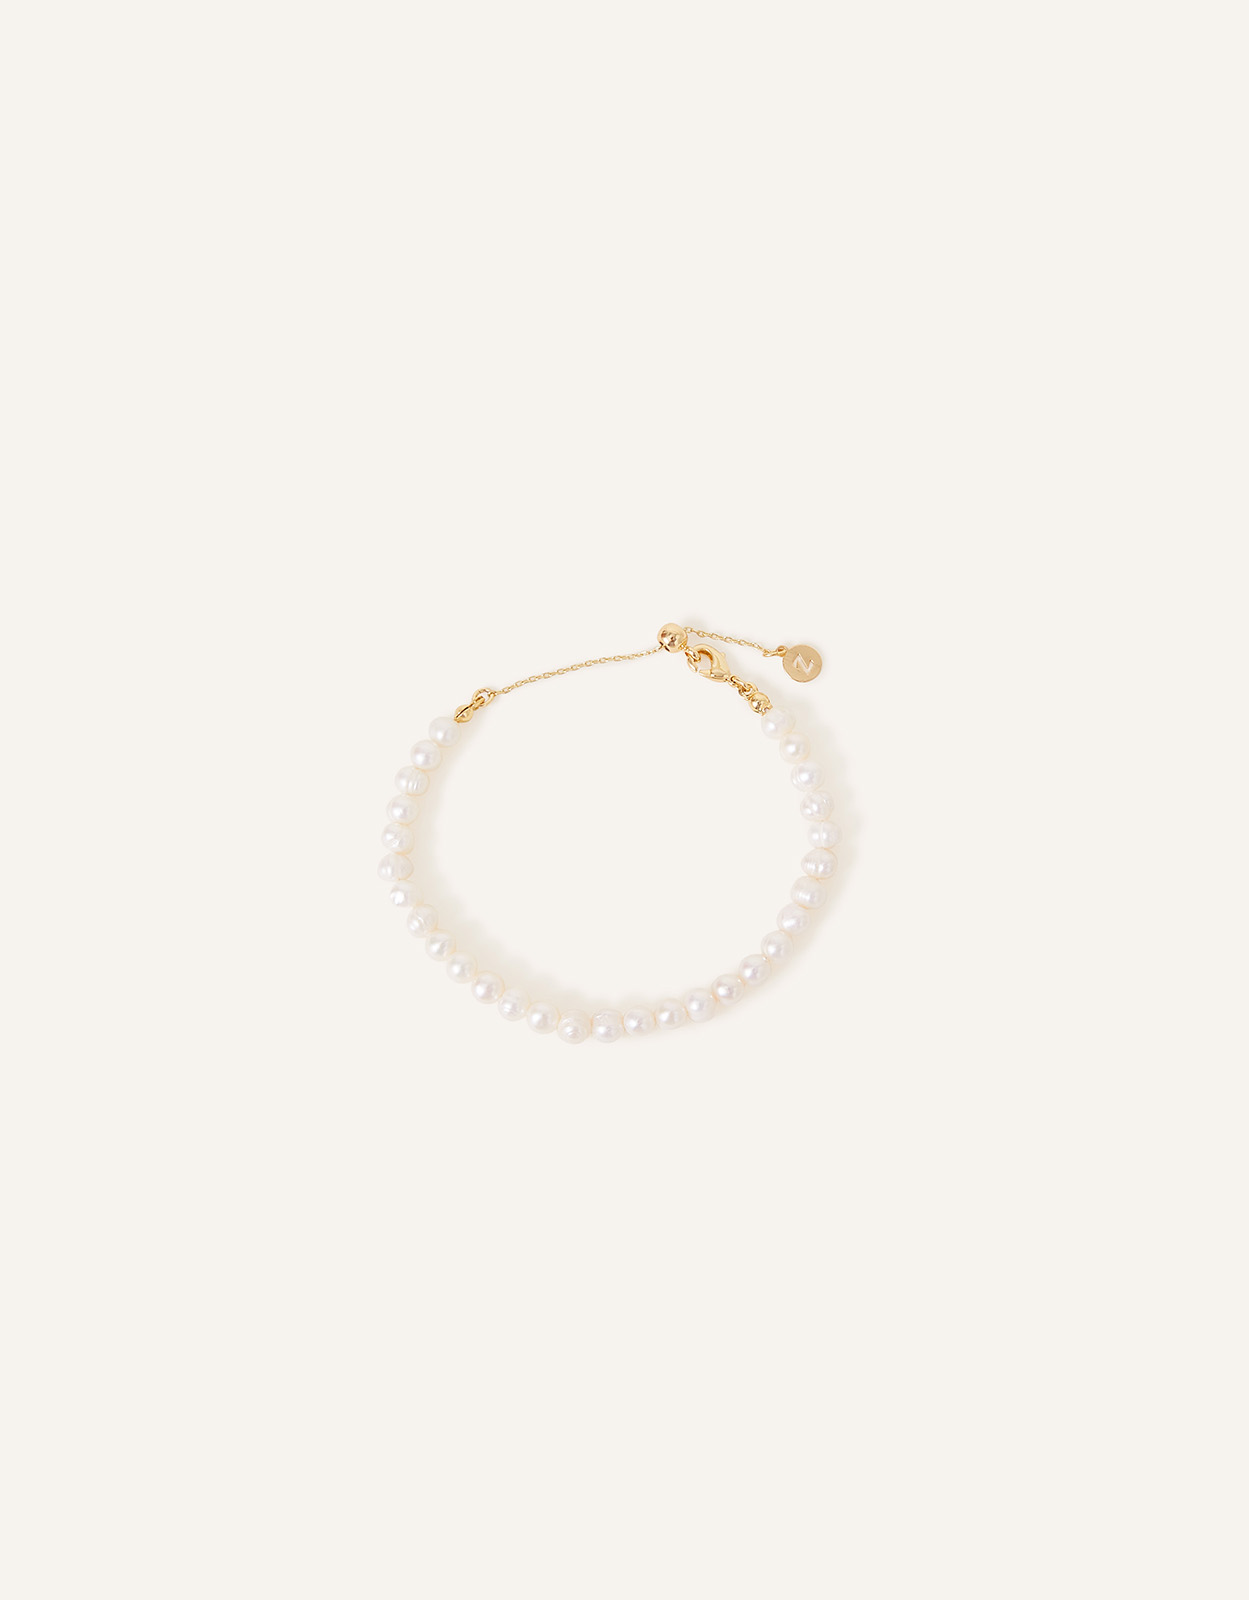 Accessorize Women's 14ct Gold-Plated Pearl Slider Bracelet